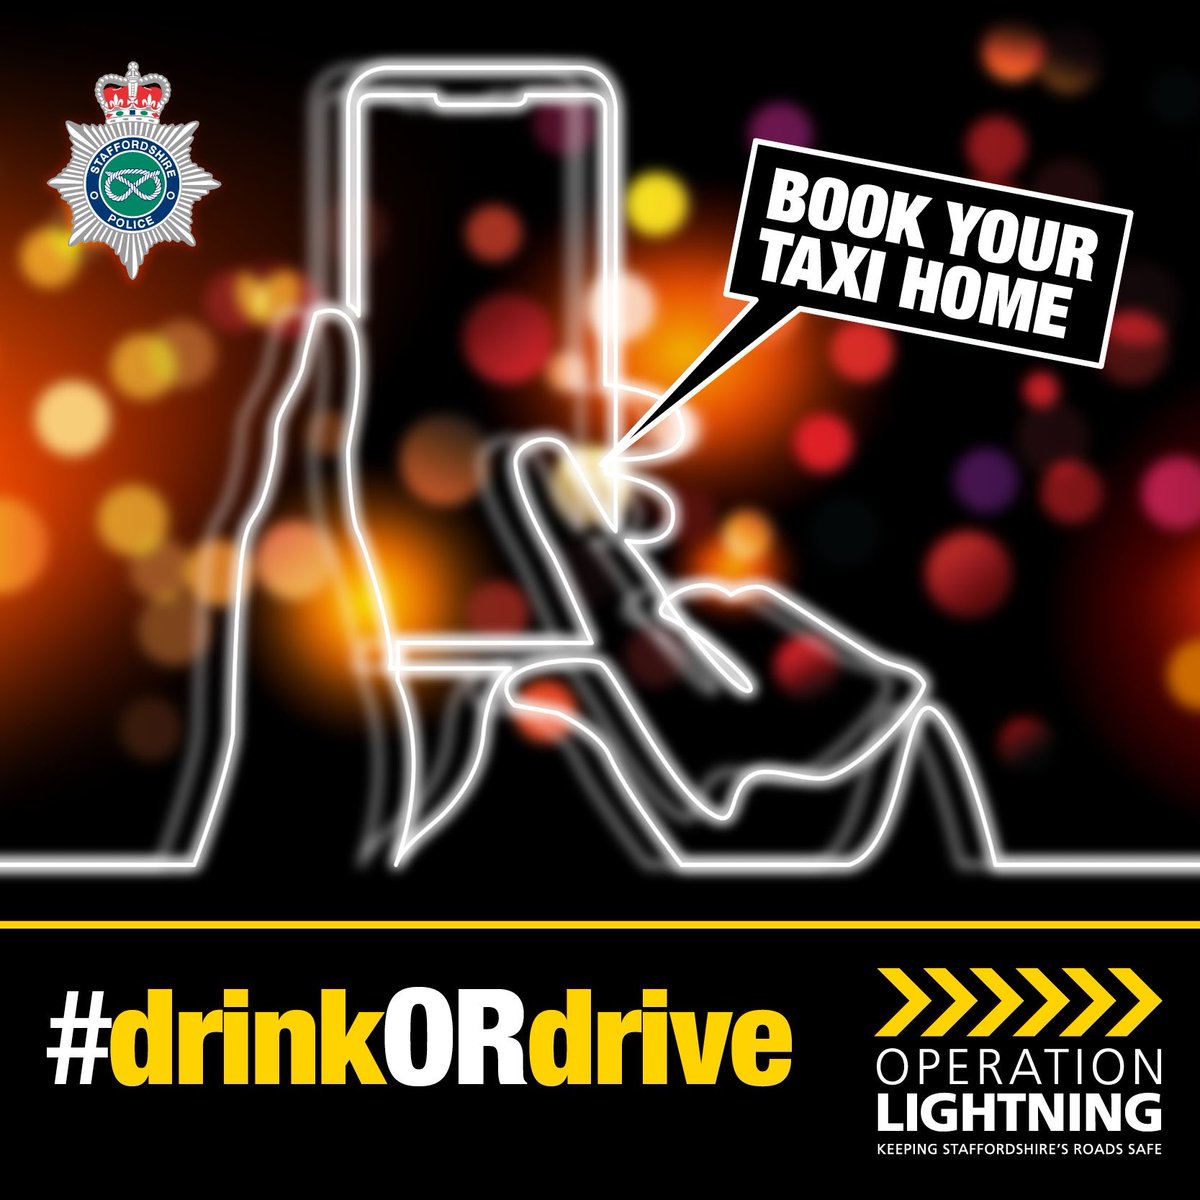 A number of Drink and Drug drivers have been arrested throughout the night in Stafford, Cannock and South Staffordshire. There is no excuse. Drink and Drug drivers will be charged and prosecuted. #Drinkordrive #OpLightning